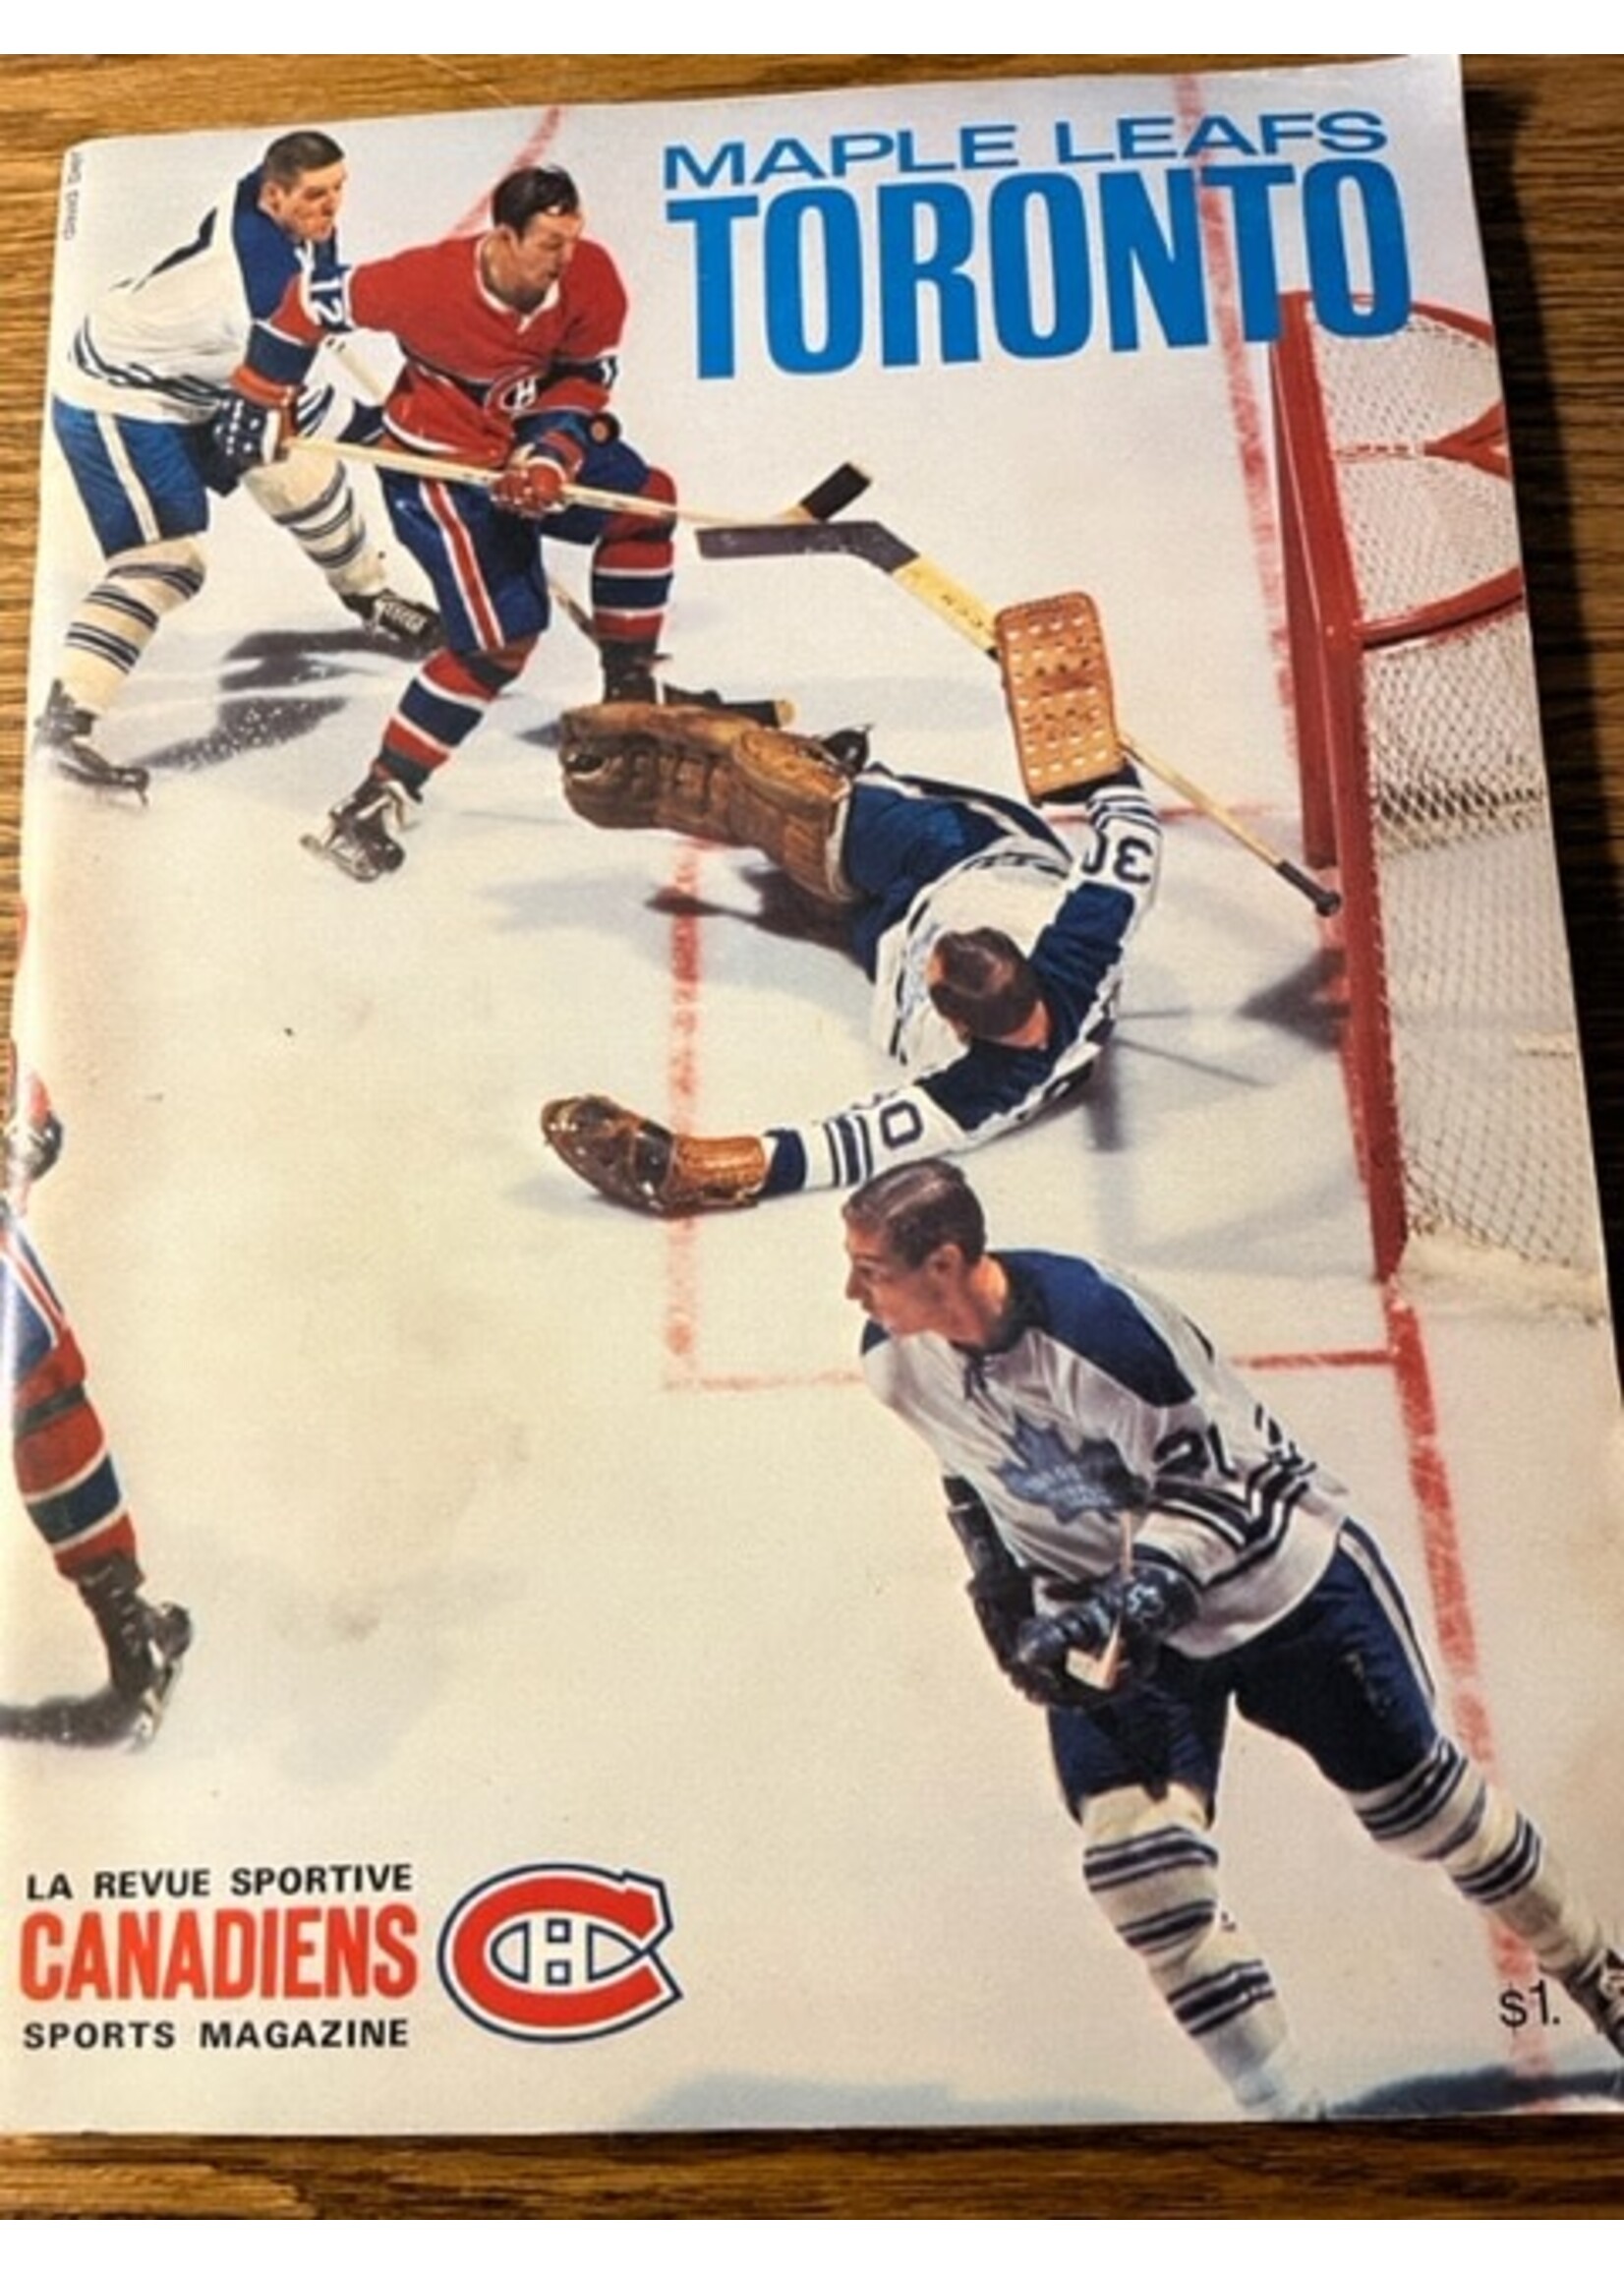 Toronto Maple Leafs & Montreal Canadians Book